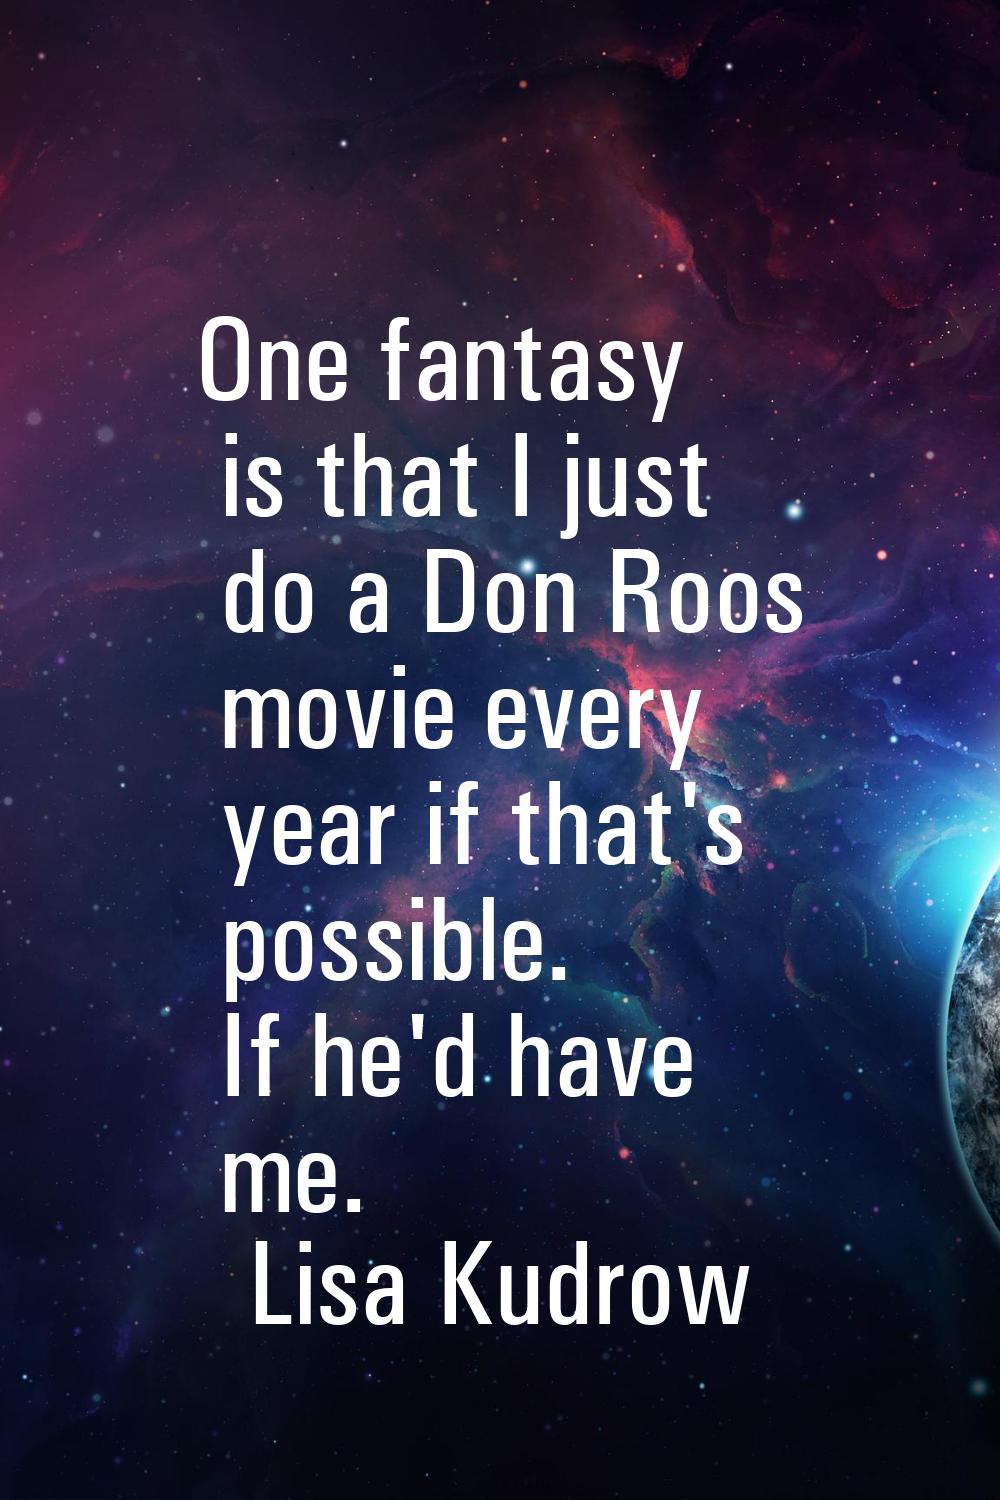 One fantasy is that I just do a Don Roos movie every year if that's possible. If he'd have me.